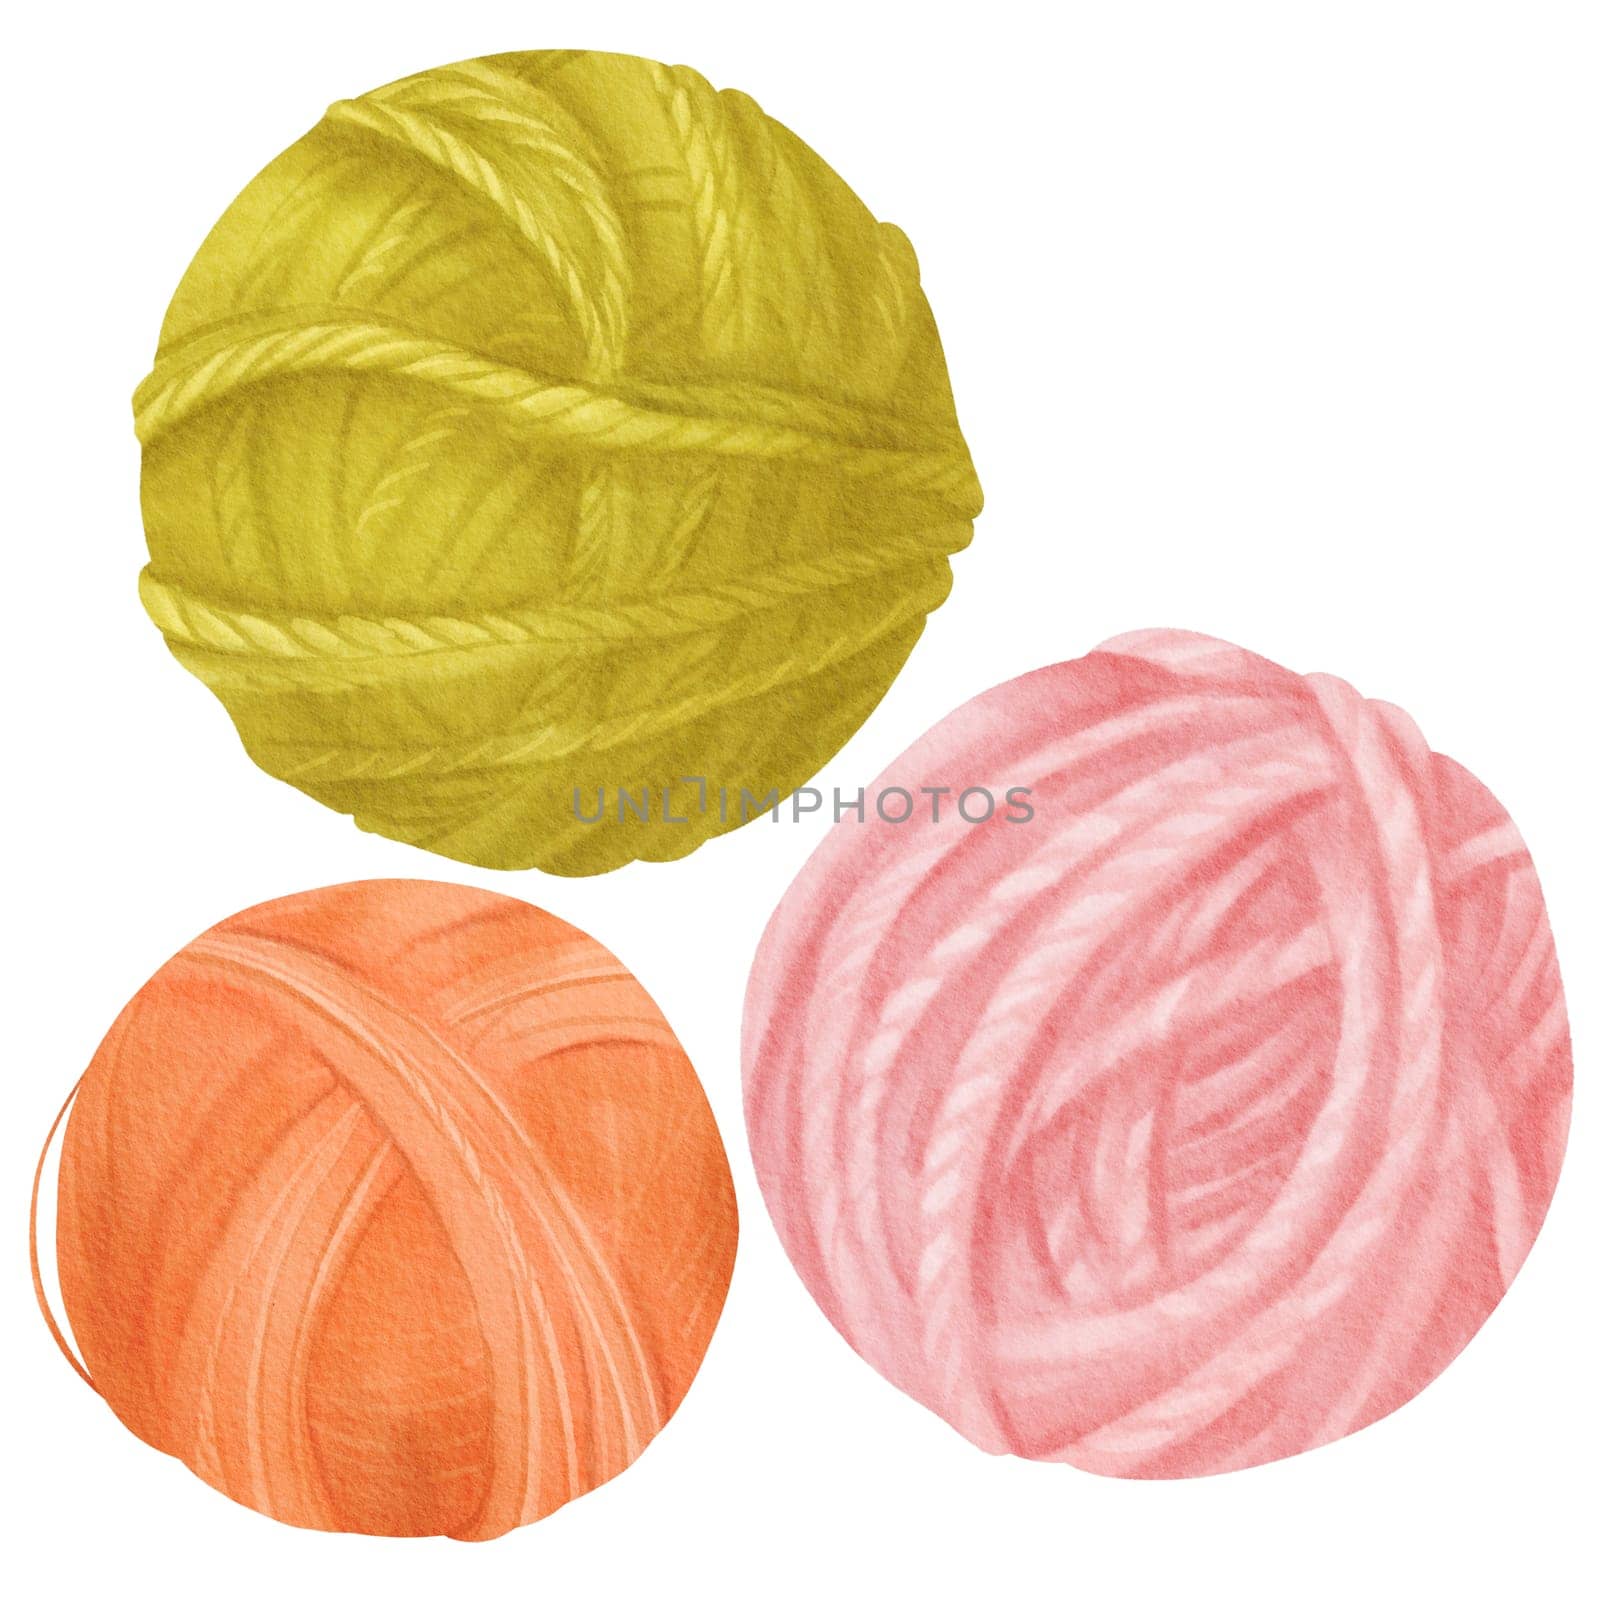 A collection of assorted yarn skeins. Yarn balls crafted from cotton and wool. green, orange and pink. Watercolor isolated elements for crafting enthusiasts, textile designs, and knitting tutorials by Art_Mari_Ka